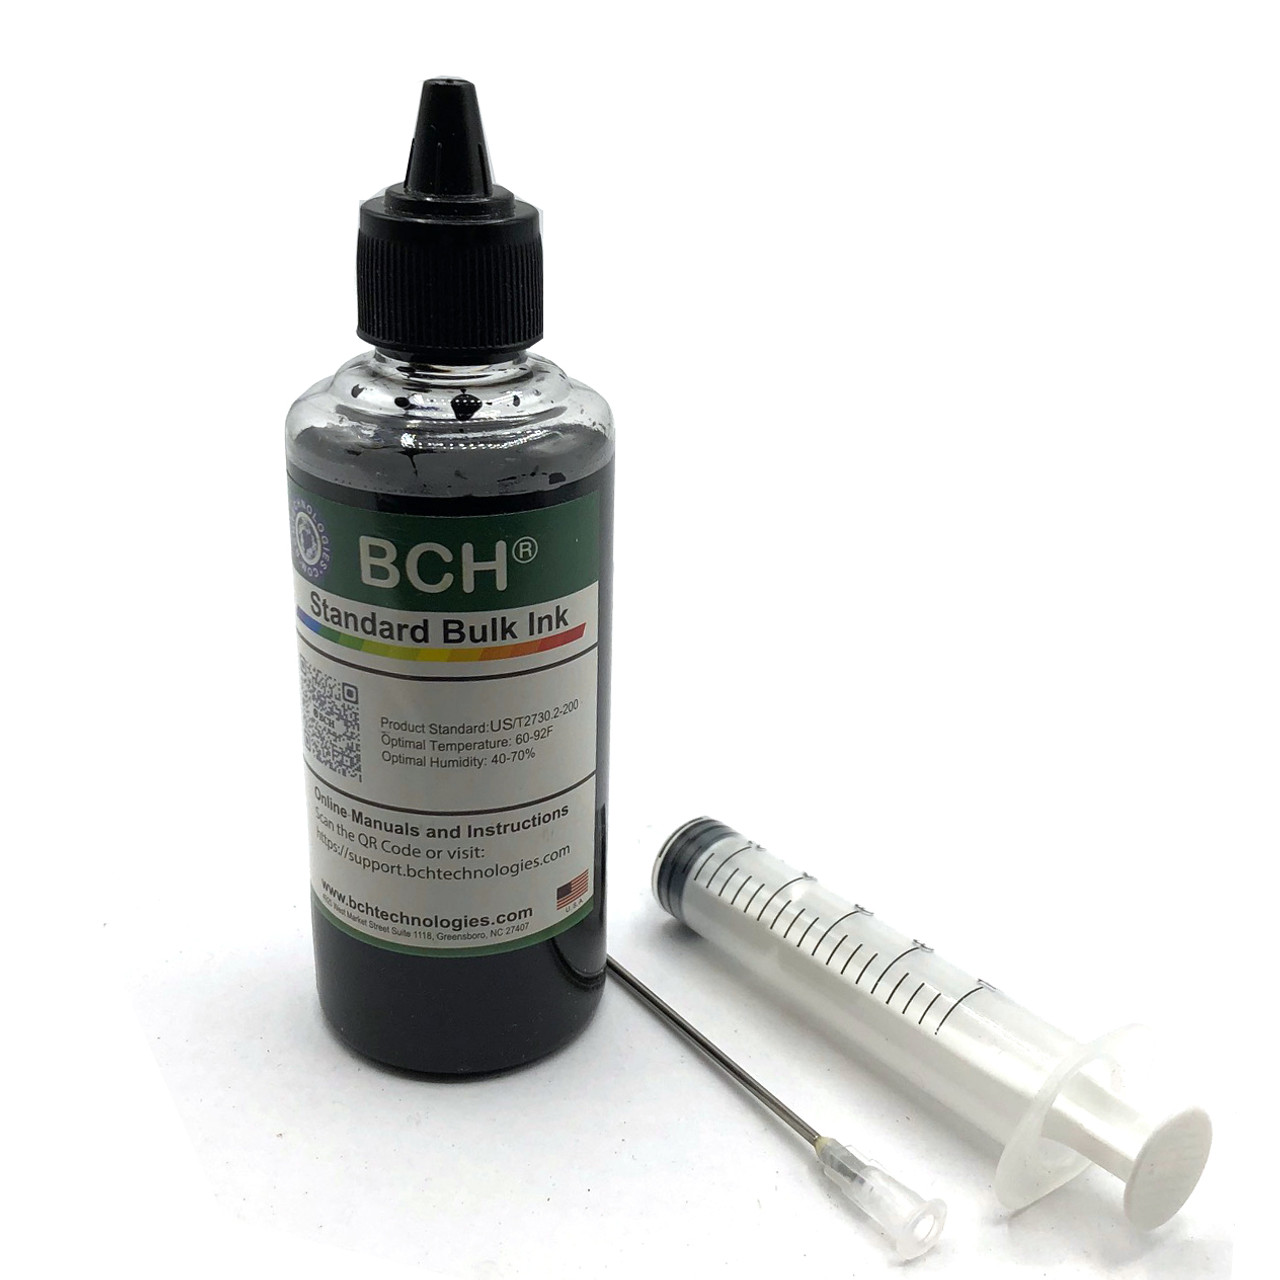 BCH Priming Clip for Refill HP Cartridges